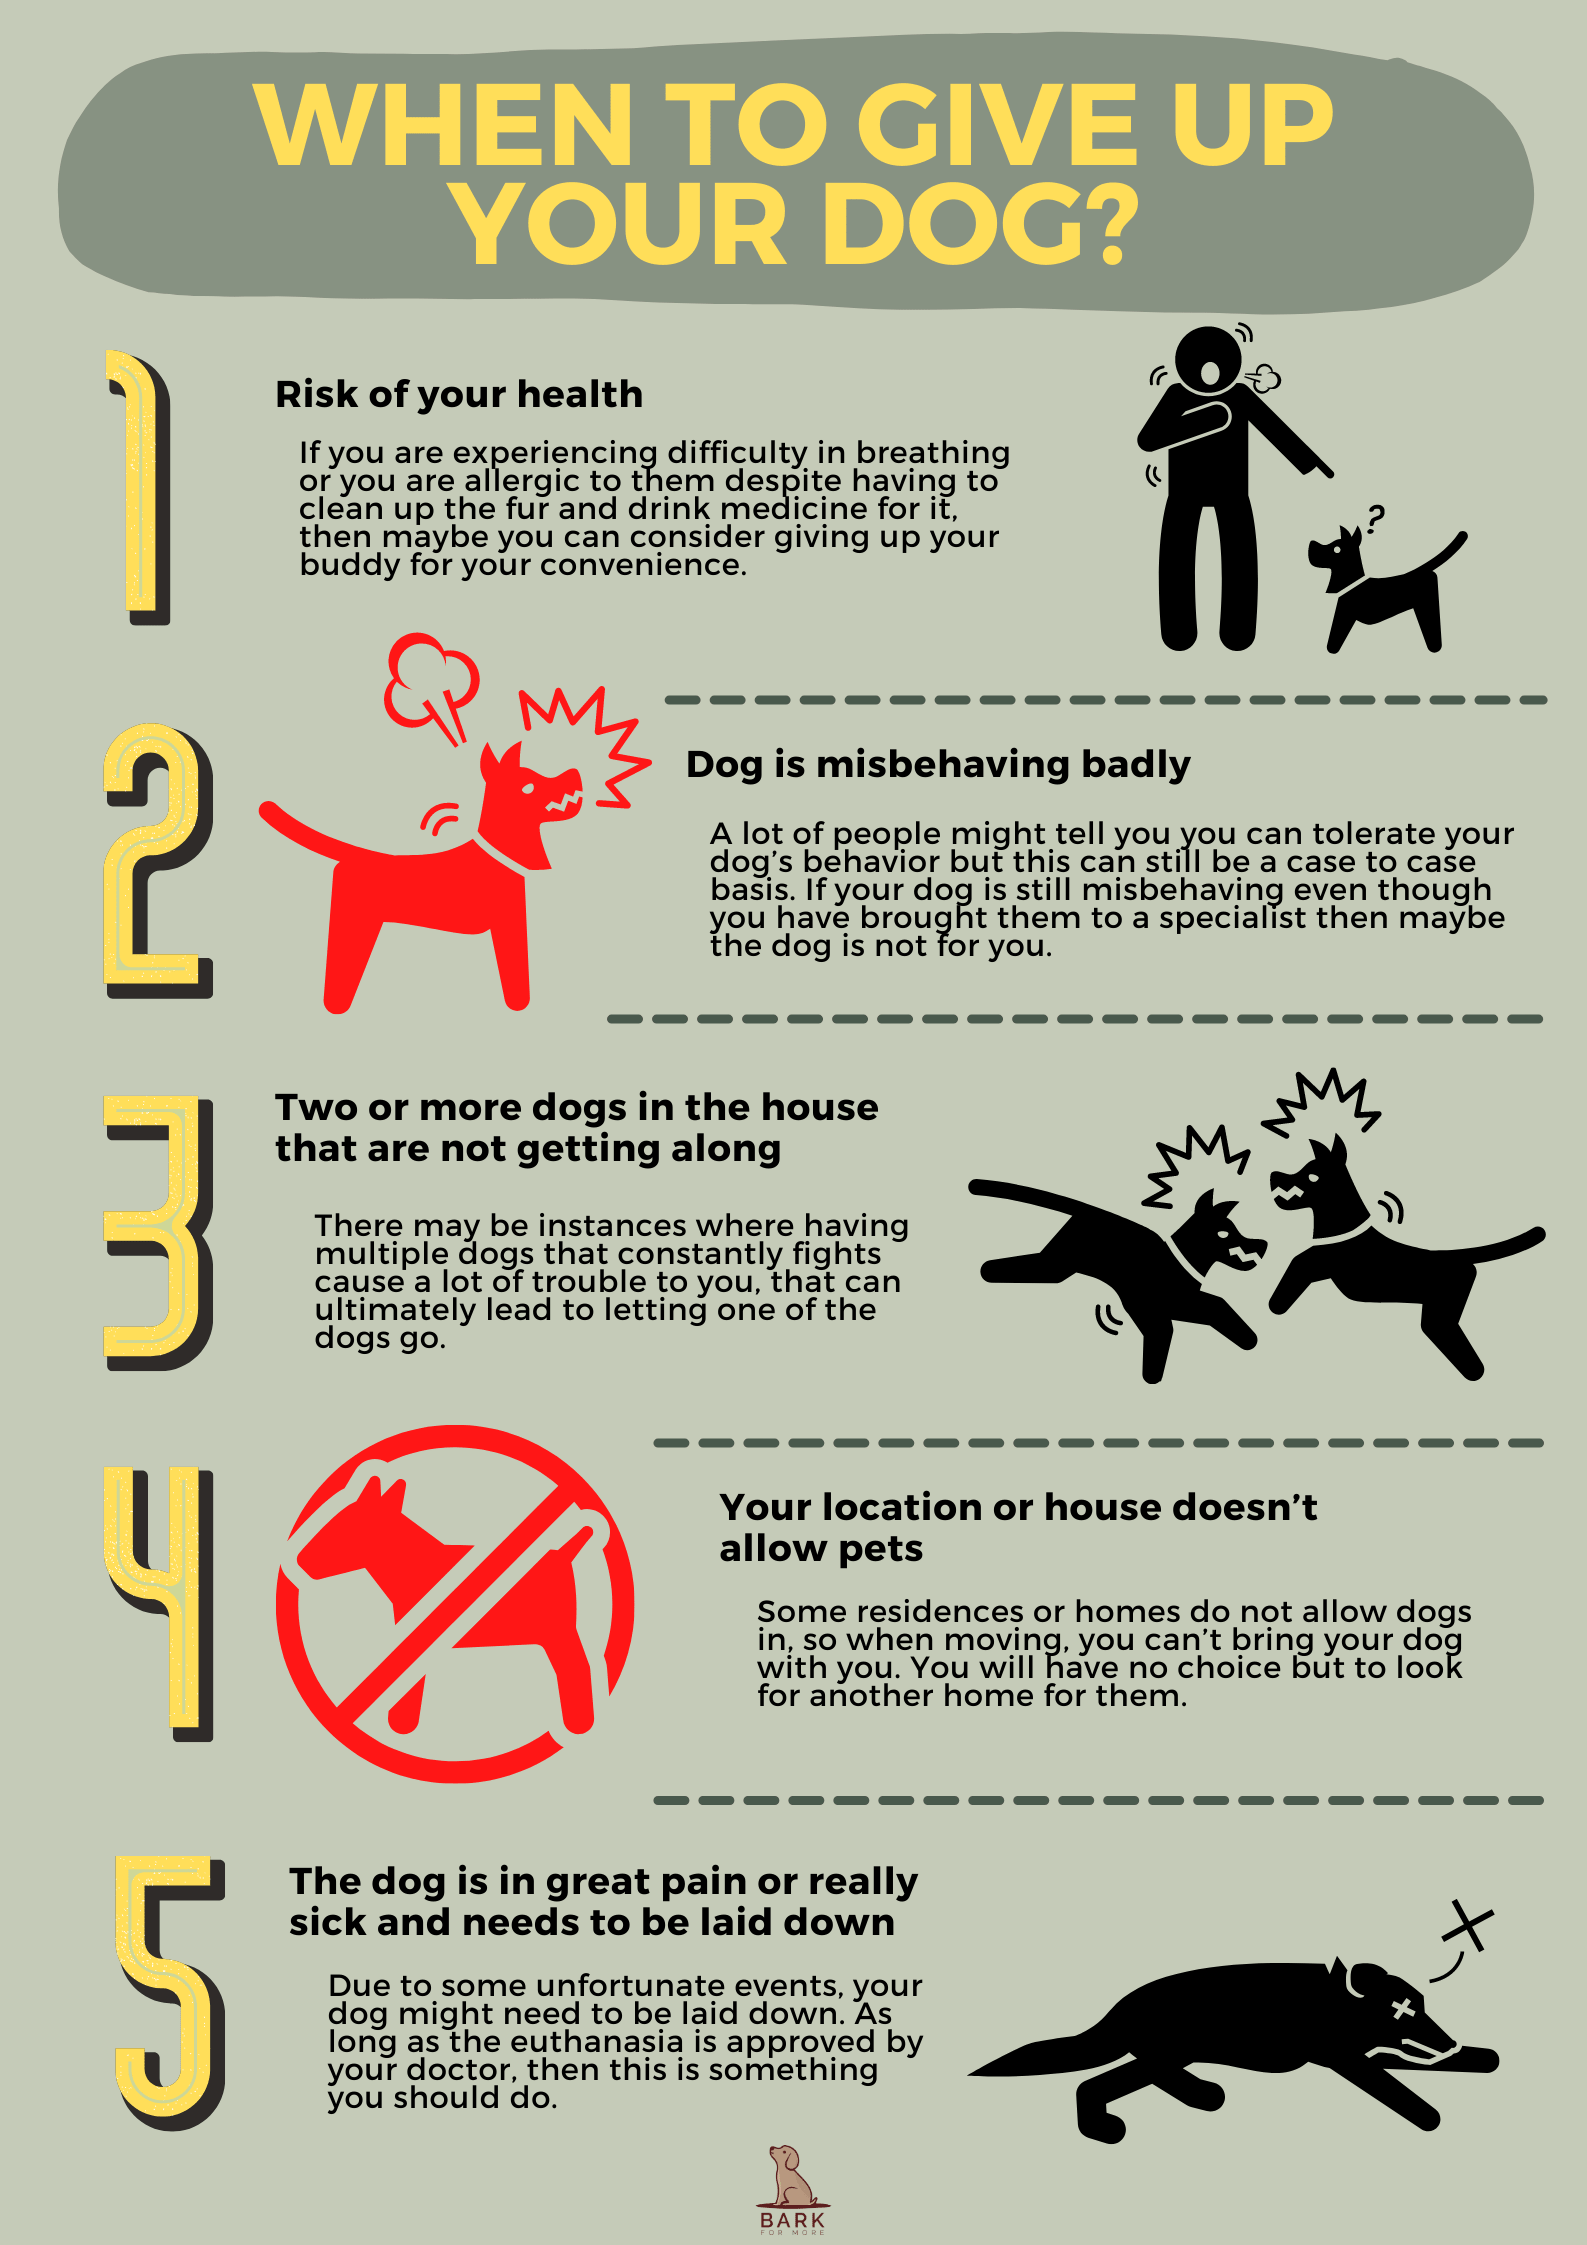 Reasons for giving your dog up